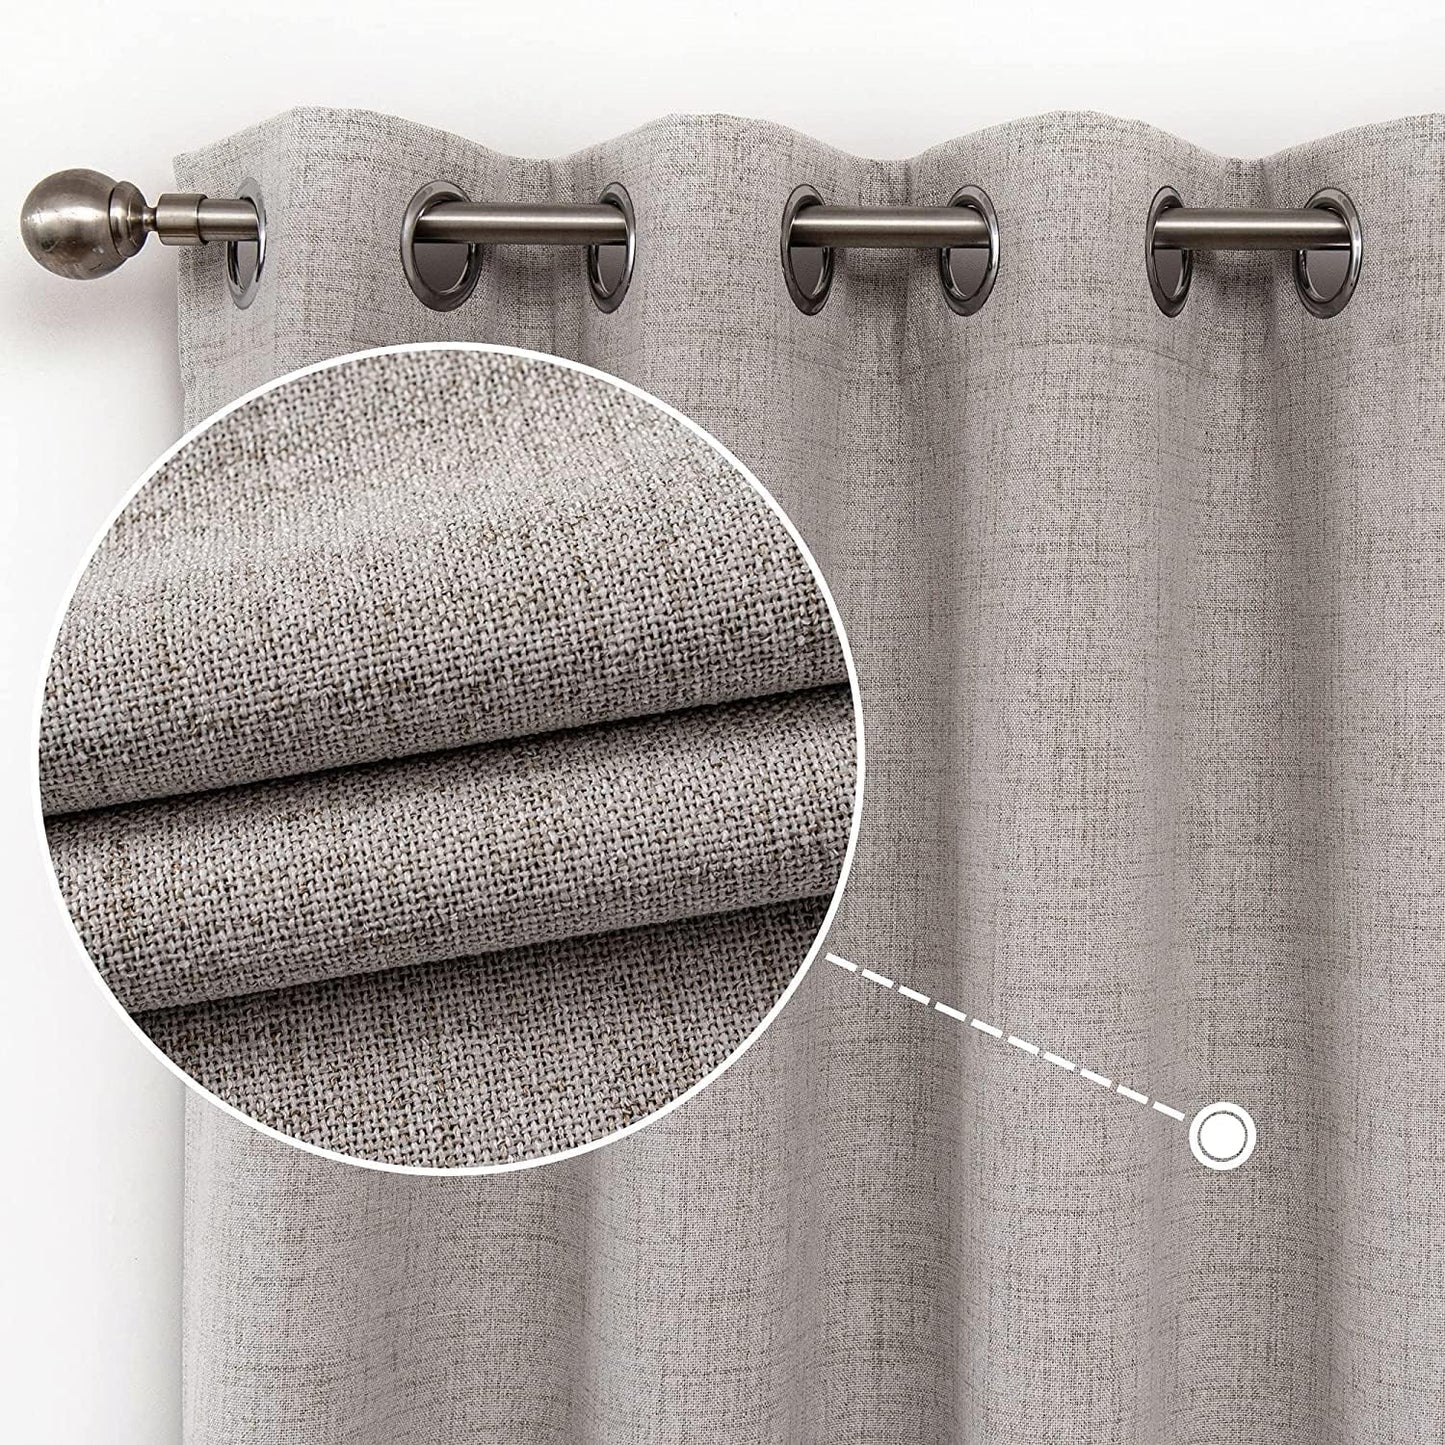 CUCRAF Full Blackout Window Curtains 84 Inches Long,Faux Linen Look Thermal Insulated Grommet Drapes Panels for Bedroom Living Room,Set of 2(52 X 84 Inches, Light Khaki)  CUCRAF Off White 52 X 63 Inches 